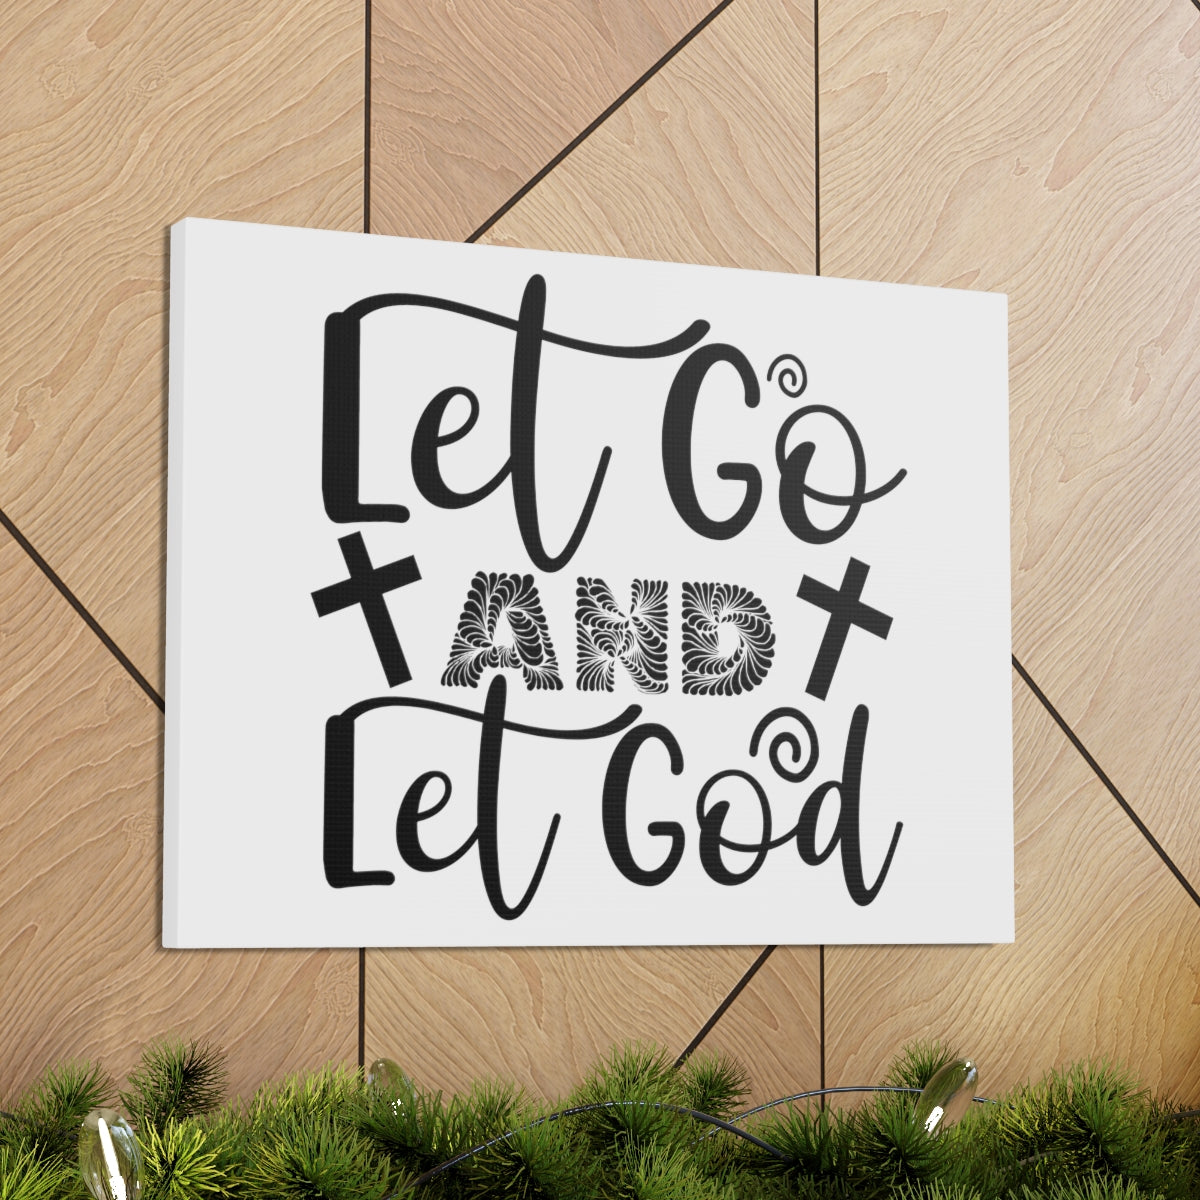 Scripture Walls And Let God Proverbs 16:9 Christian Wall Art Print Ready to Hang Unframed-Express Your Love Gifts